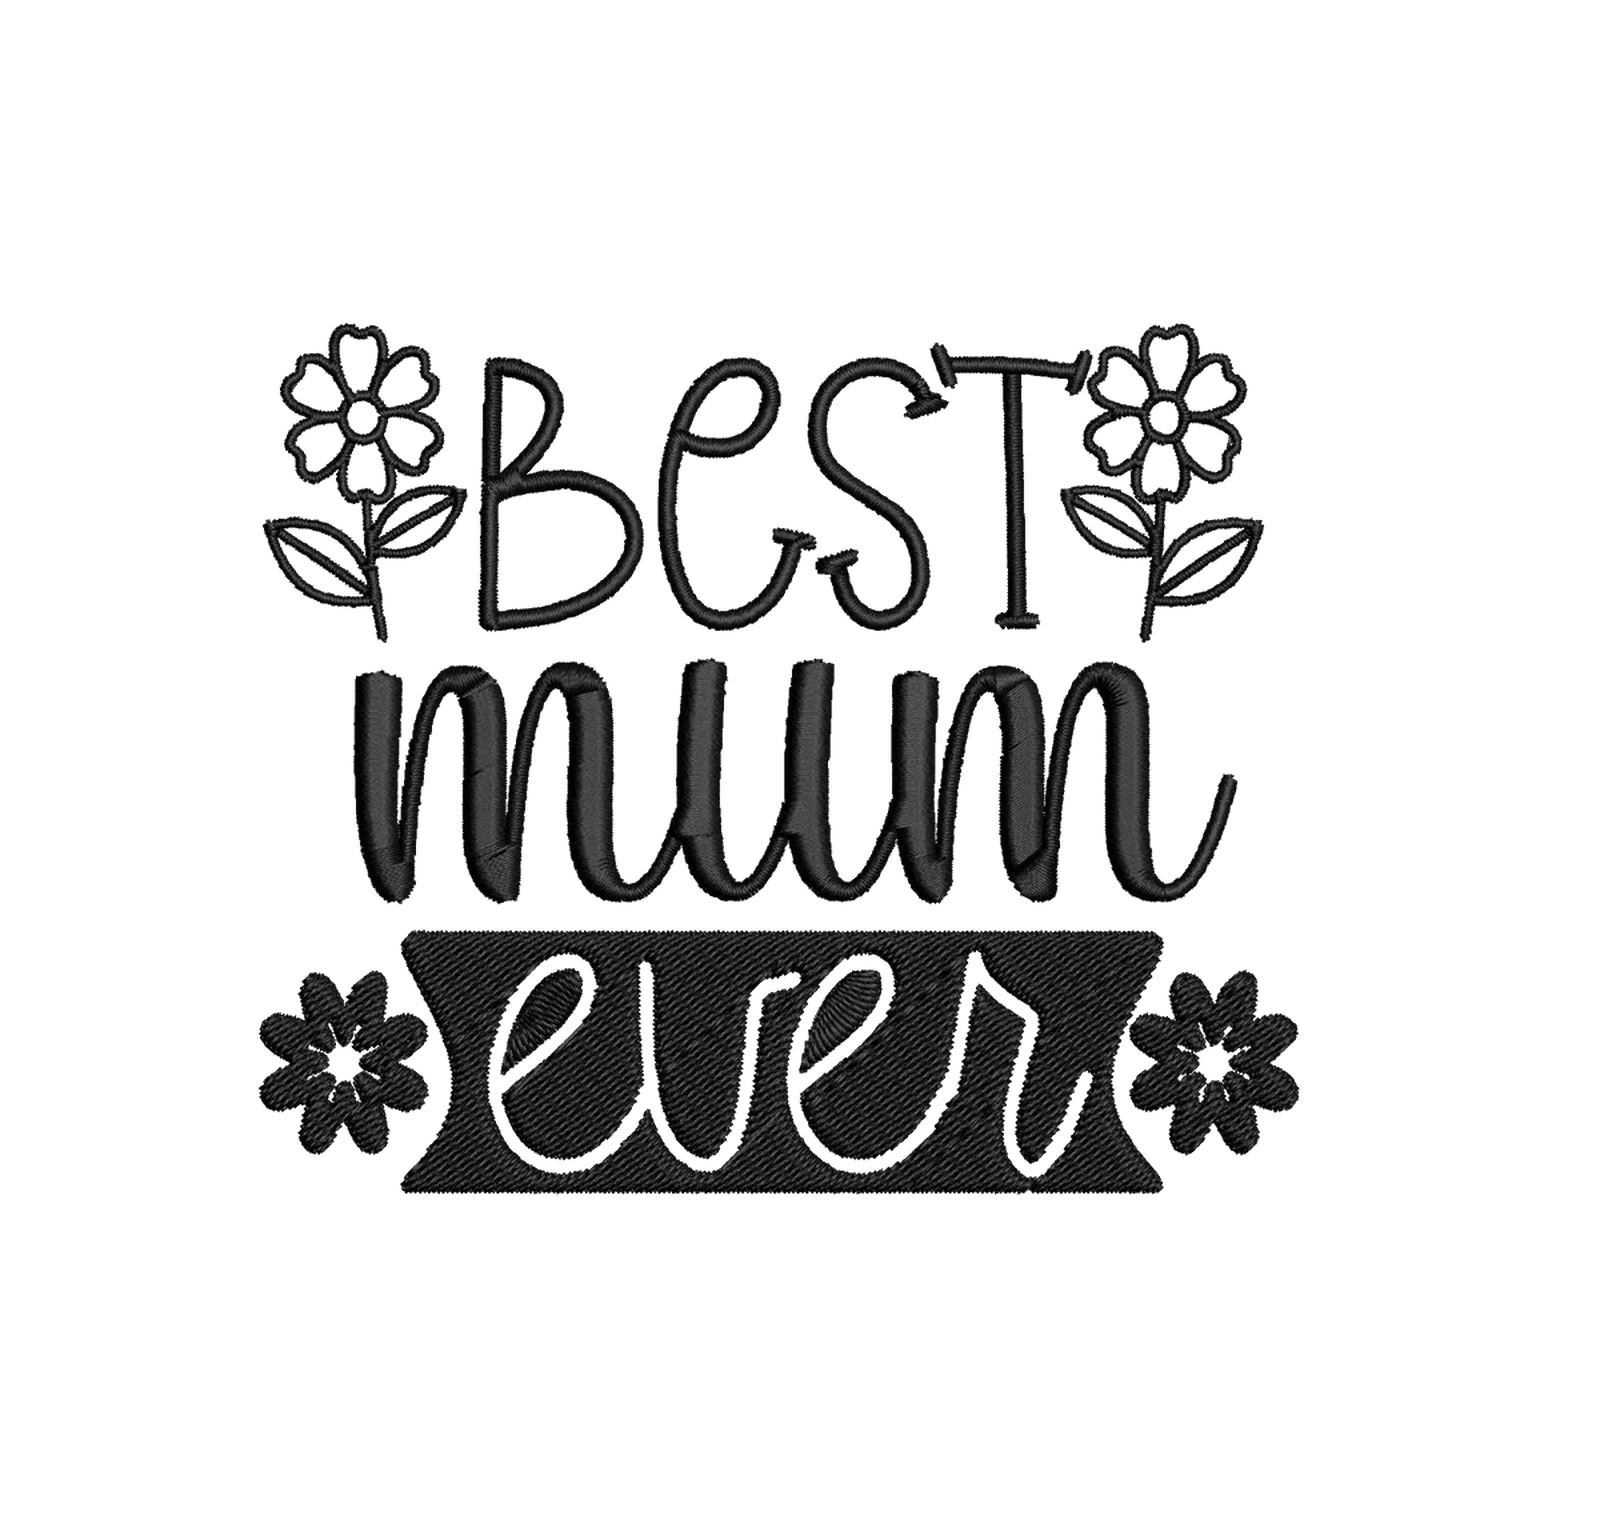 Best-mum-ever- Mothers-2 Embroidery Design - FineryEmbroidery